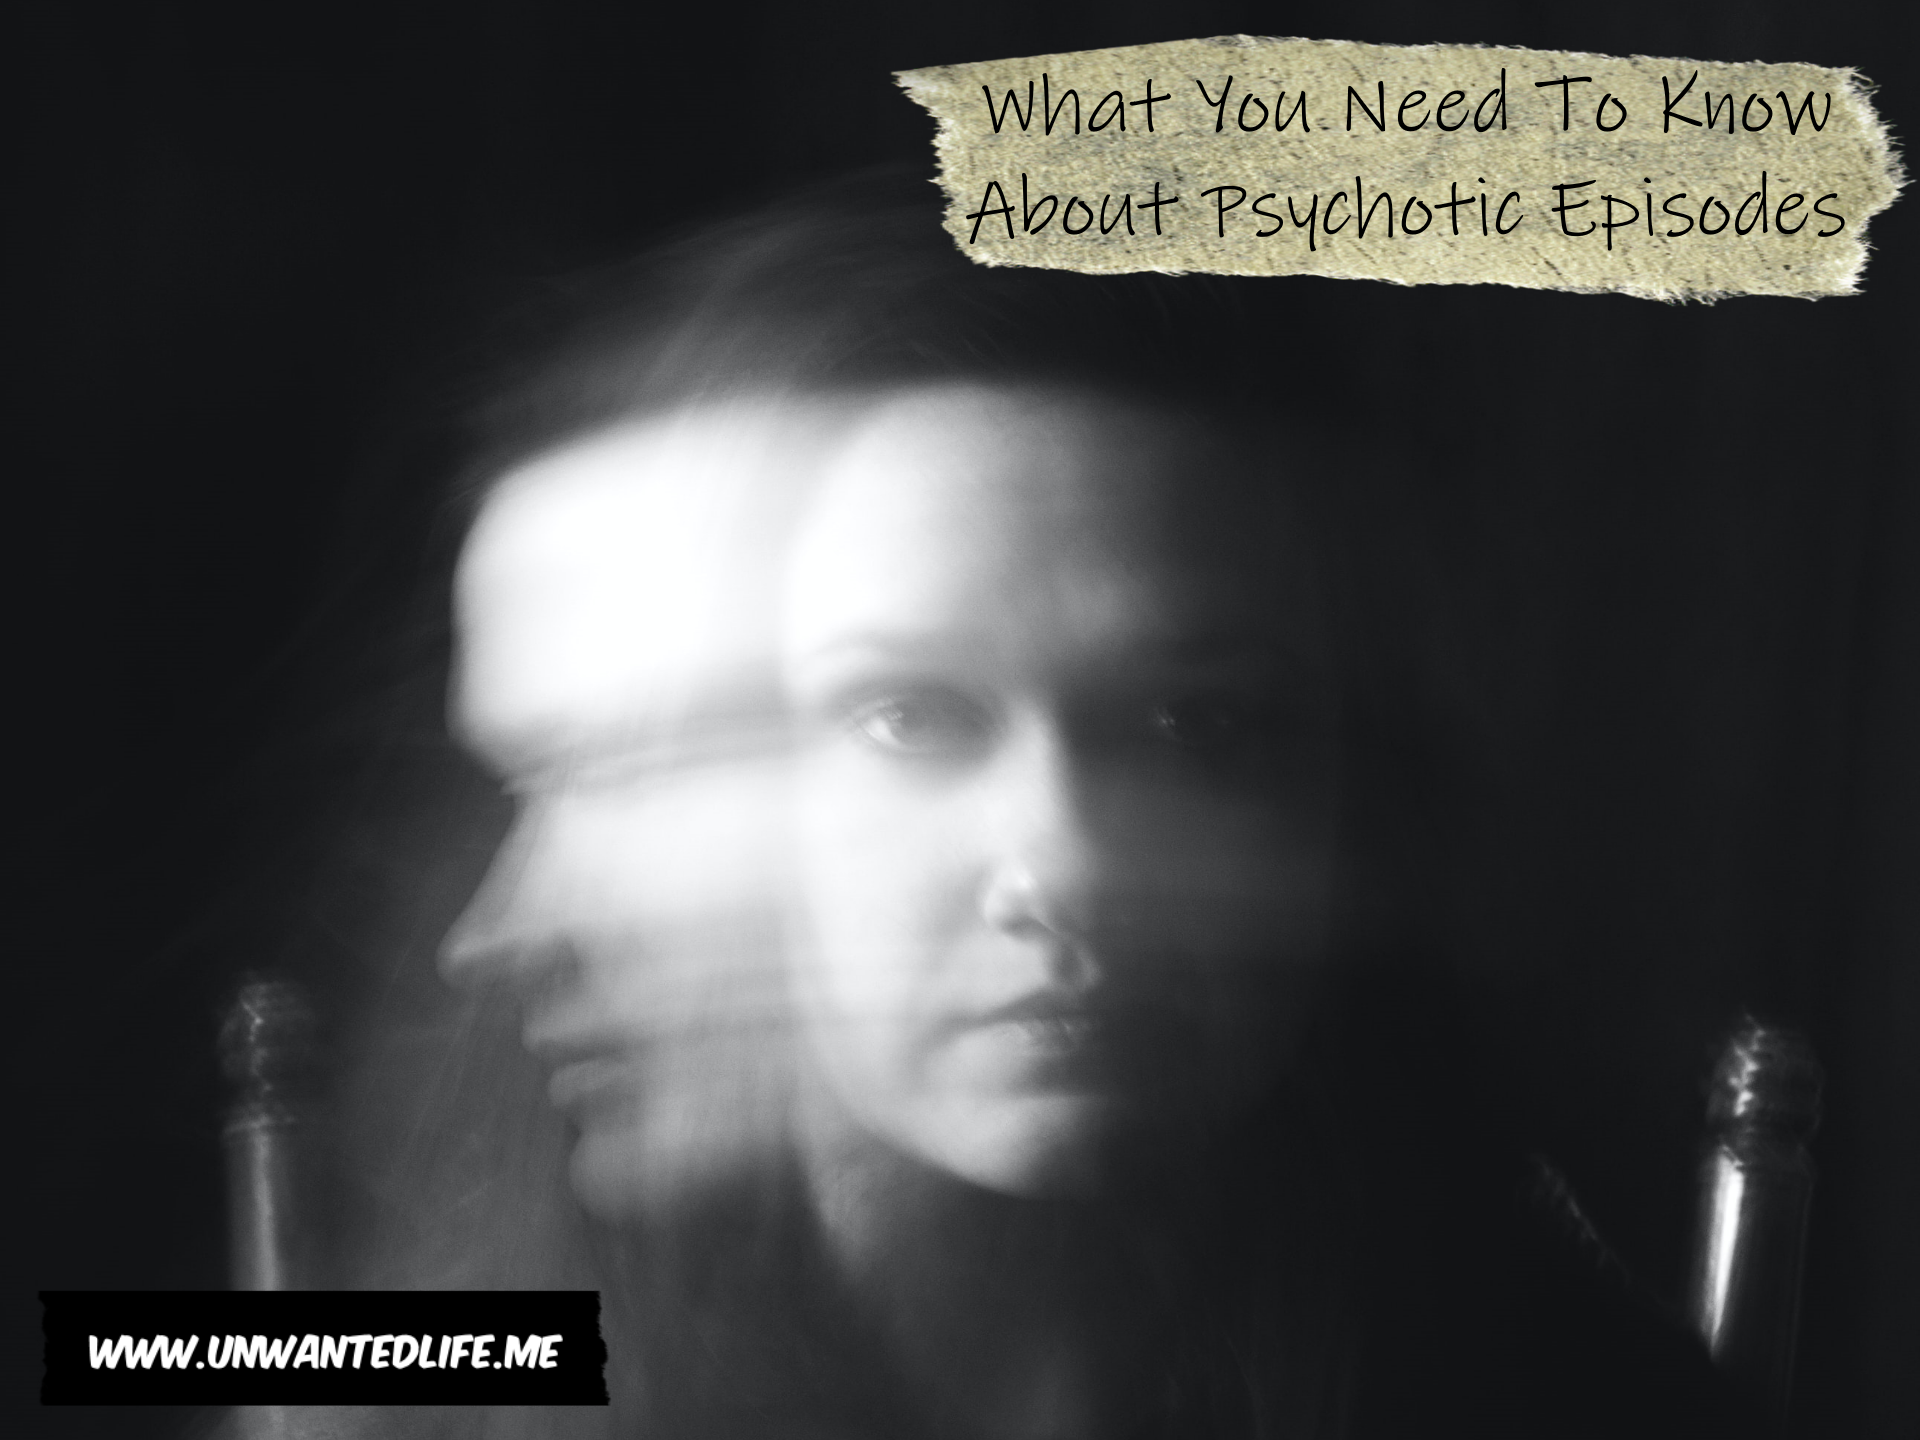 A photo created by distorting the image of a young woman to represent - What You Need To Know About Psychotic Episodes